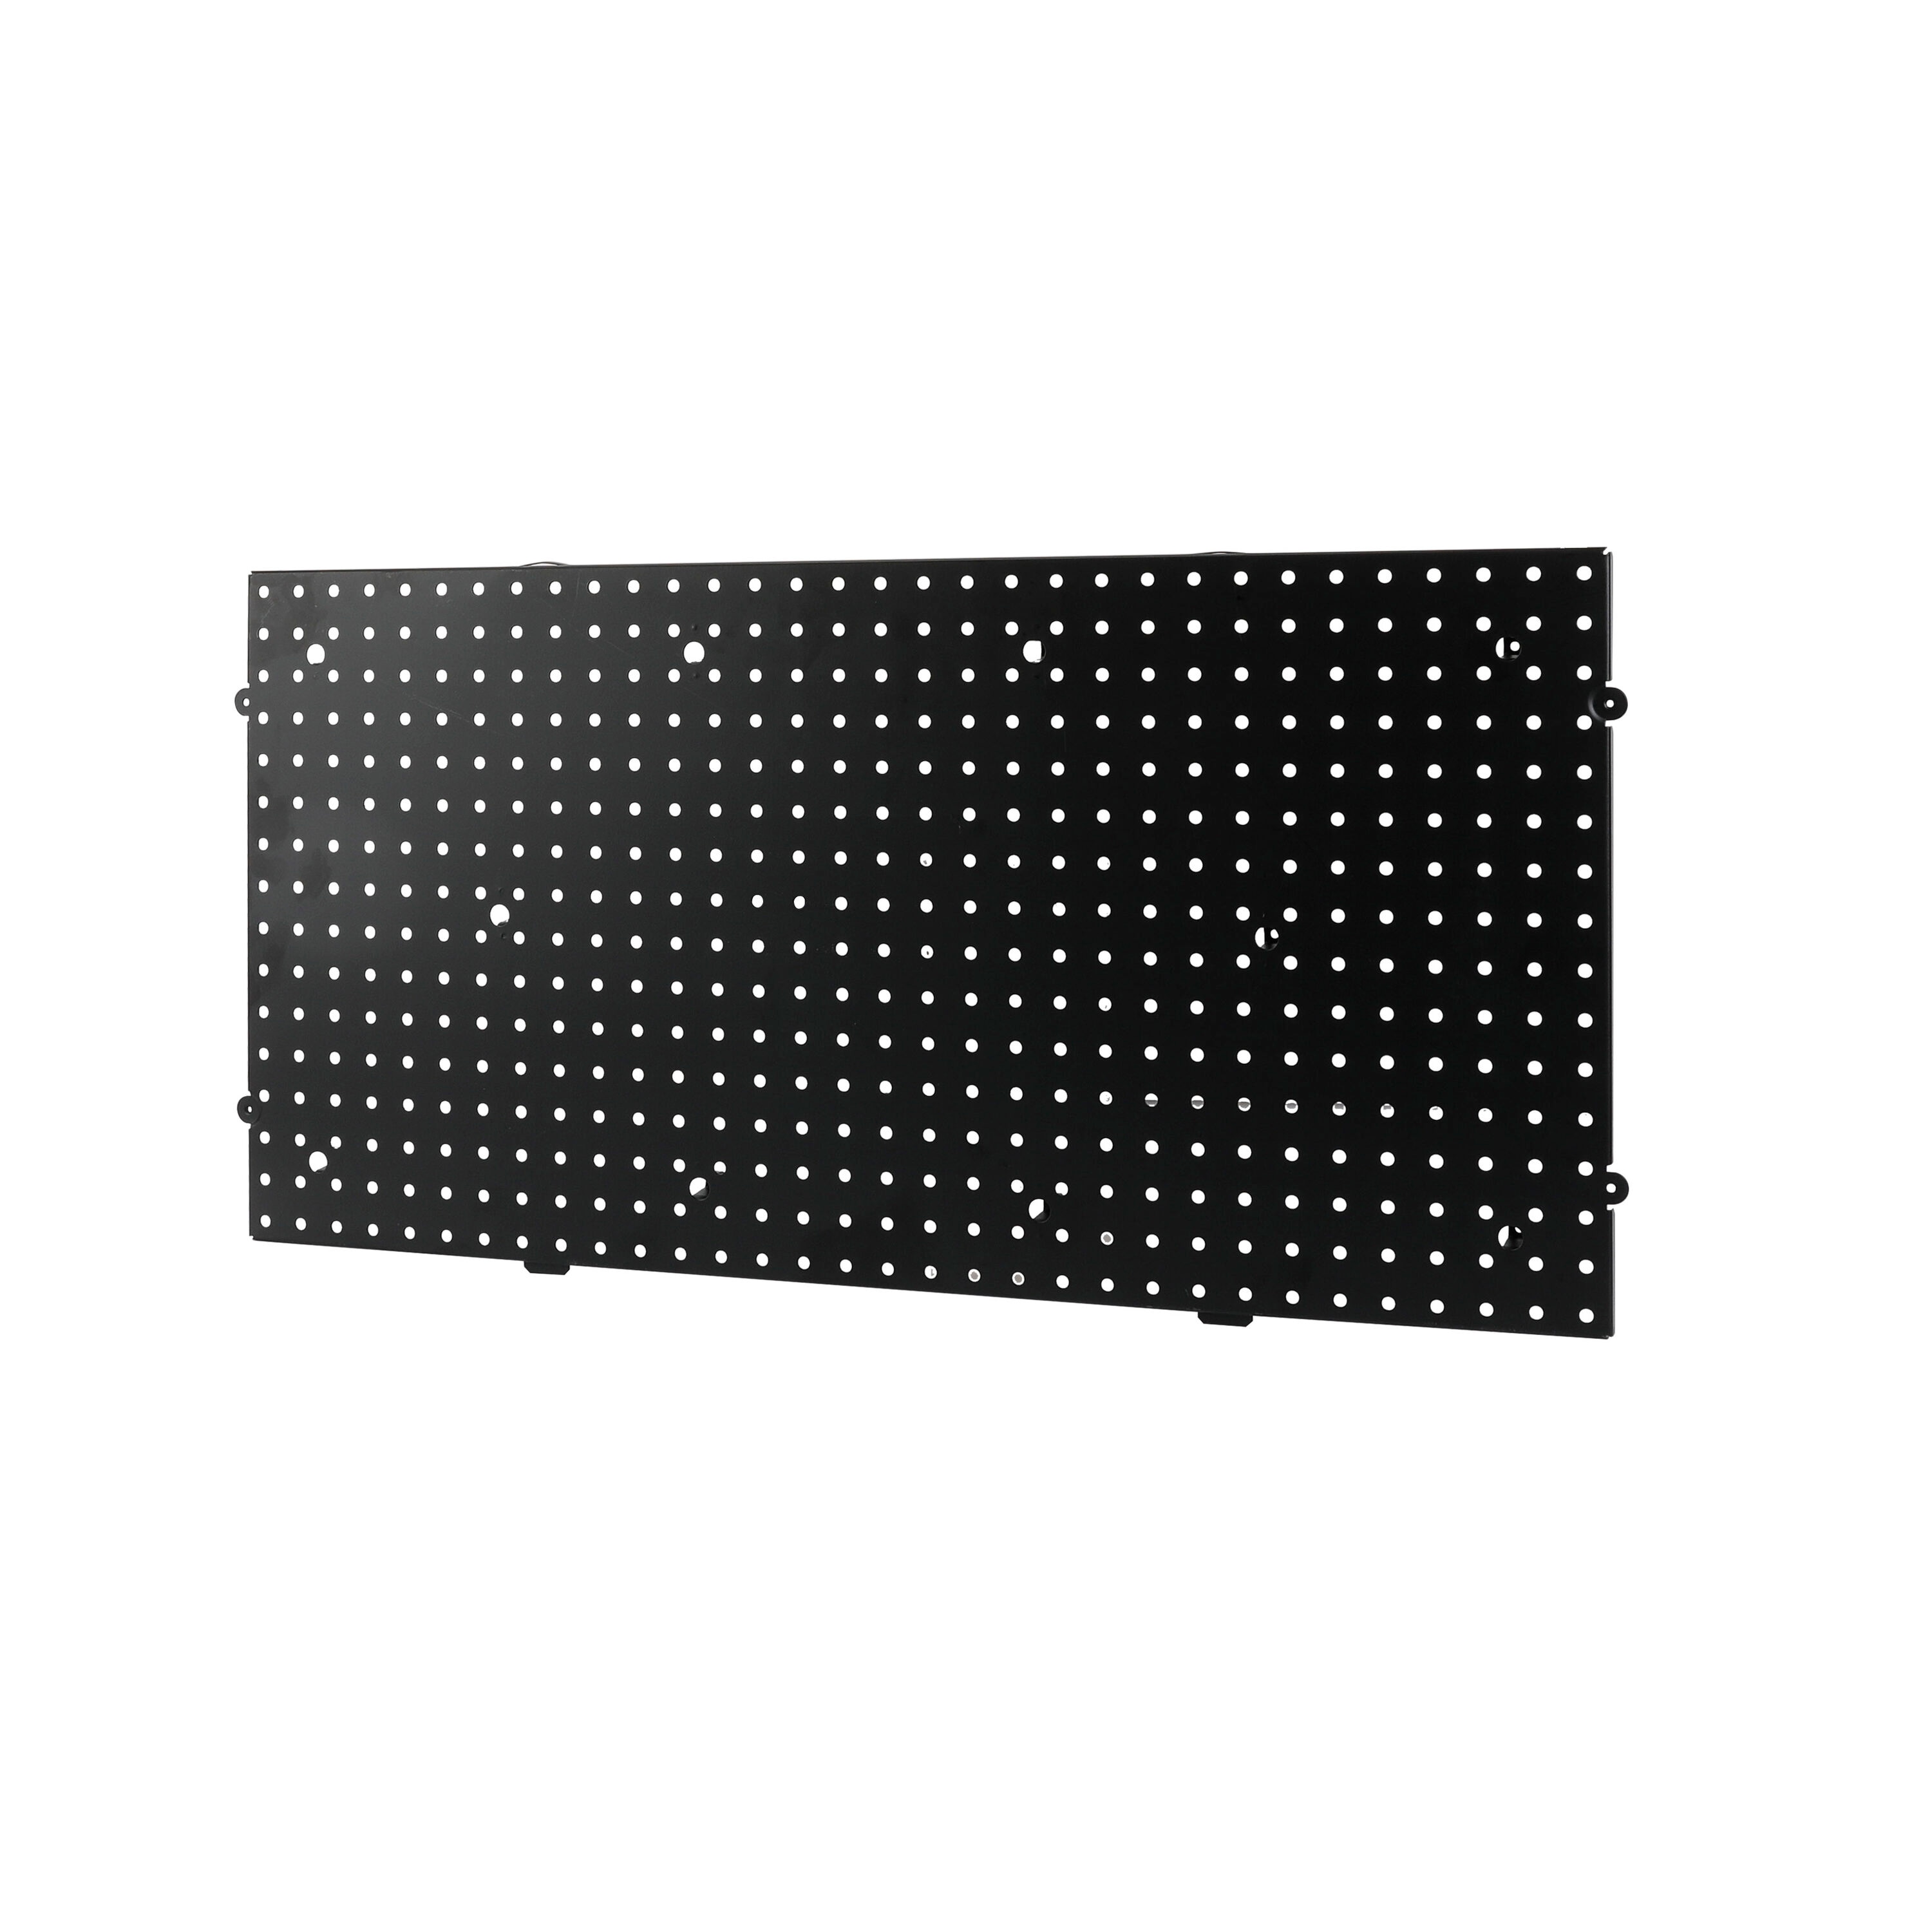 Triton Black Pegboard Kit 24 In. W x 42 In. H x 1/4 In. D HDF Pegboards  with 36 pc. Hook